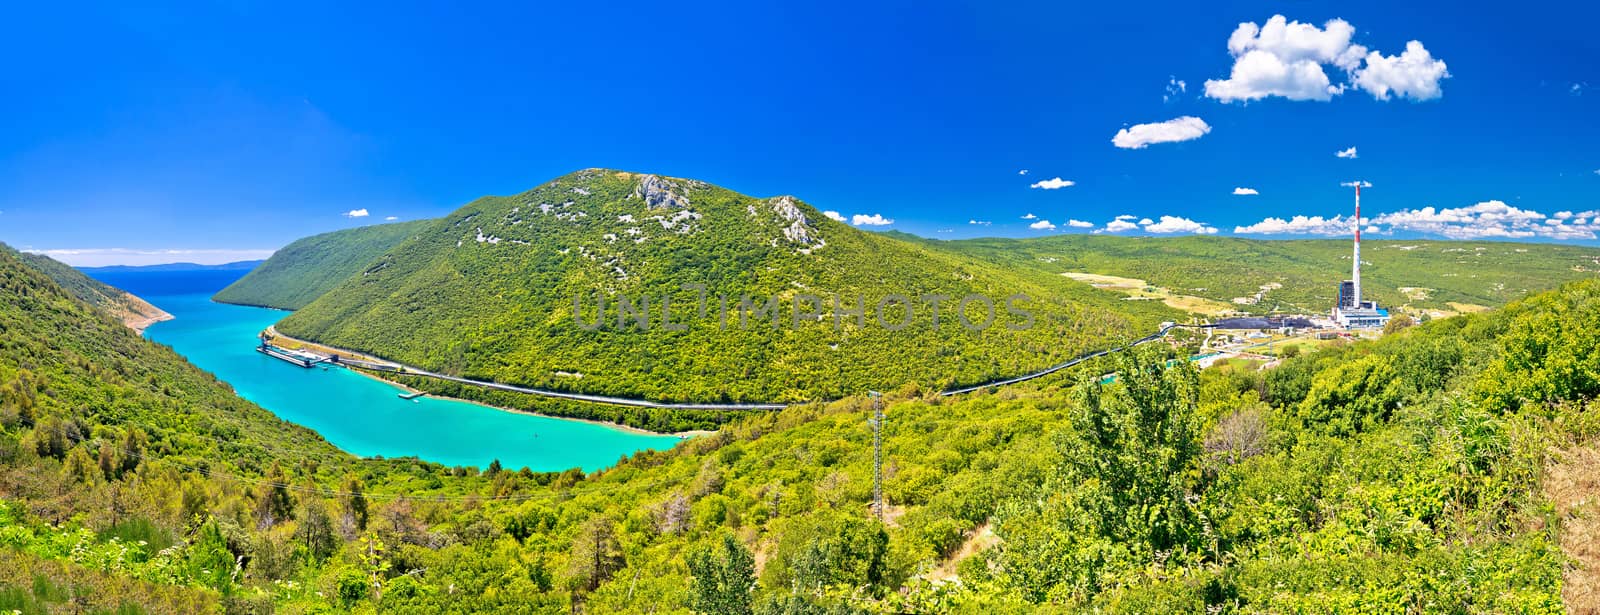 Plomin valley and bay power plant in green landscape  highest croatian chimney panoramic view, Istria region of Croatia
